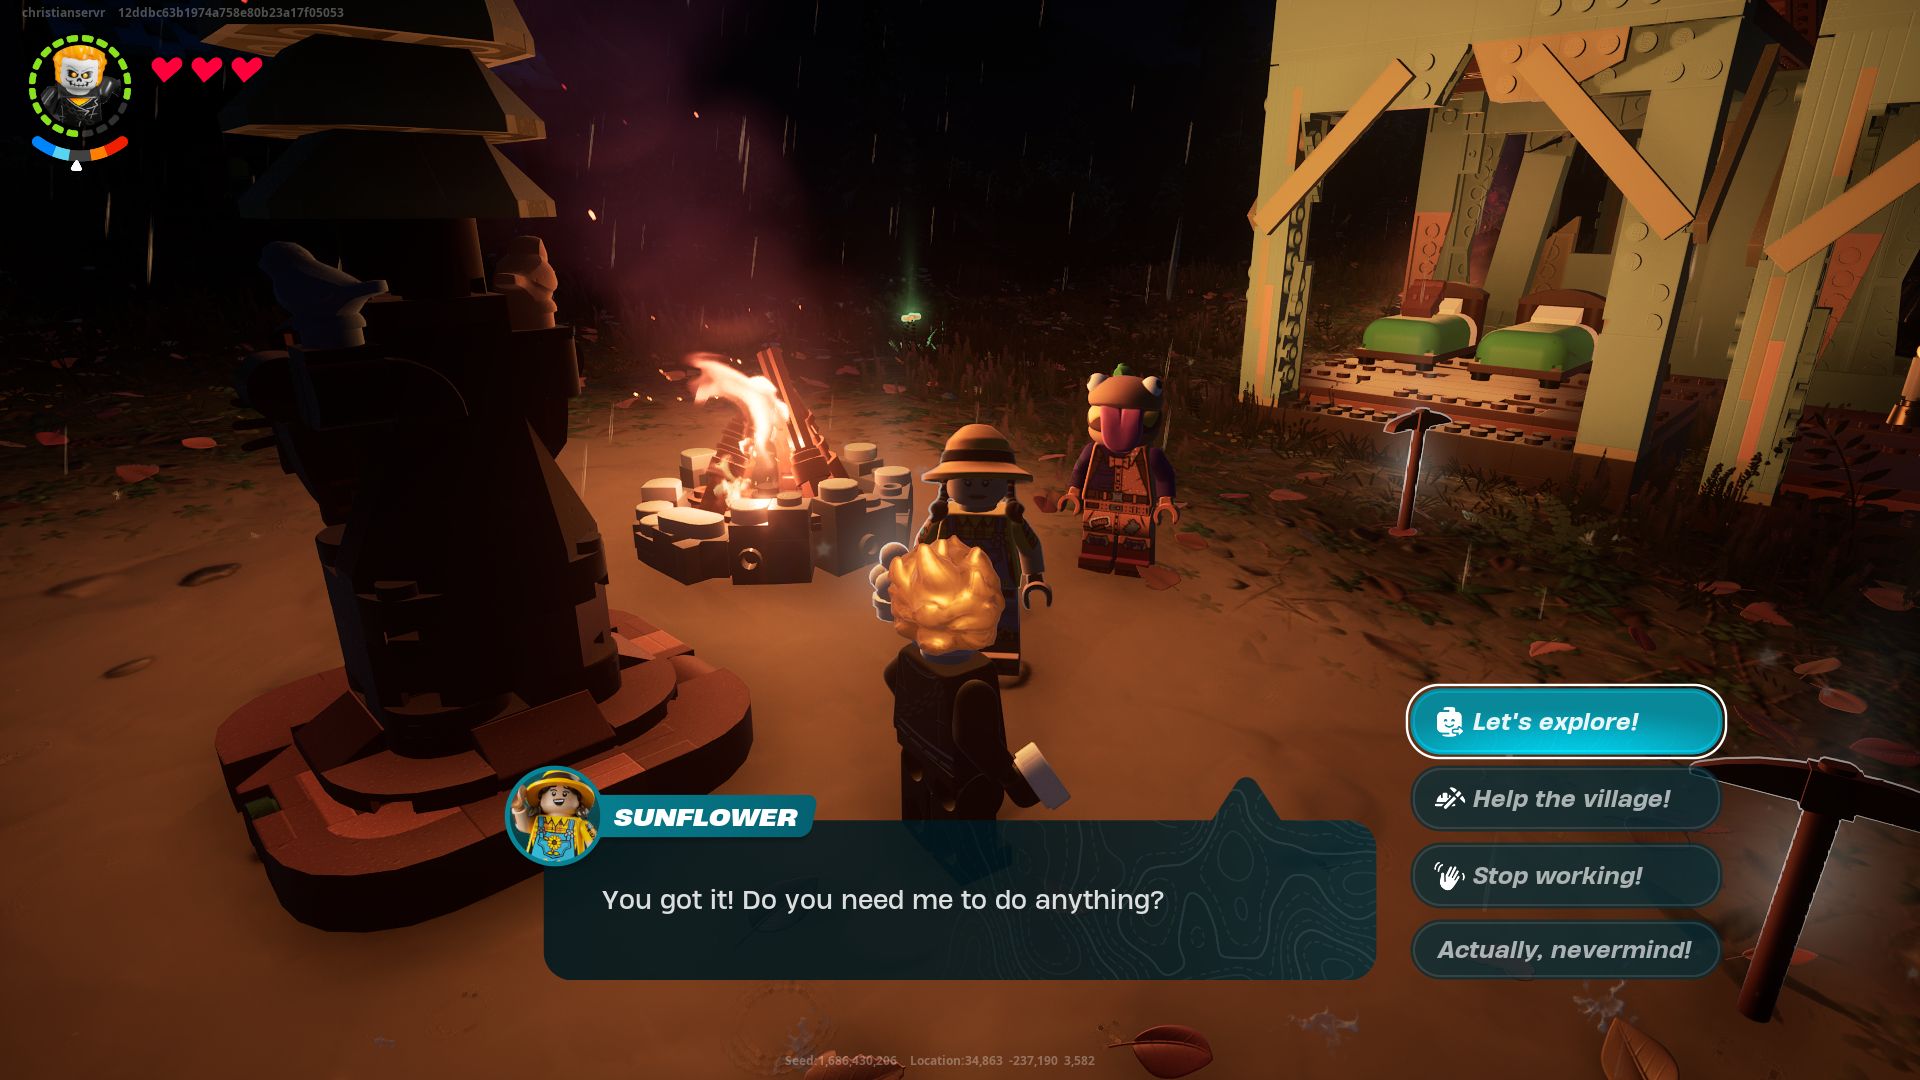 A screenshot from Lego Fortnite showing the Ghost Rider figure talking to Sunflower, with the 